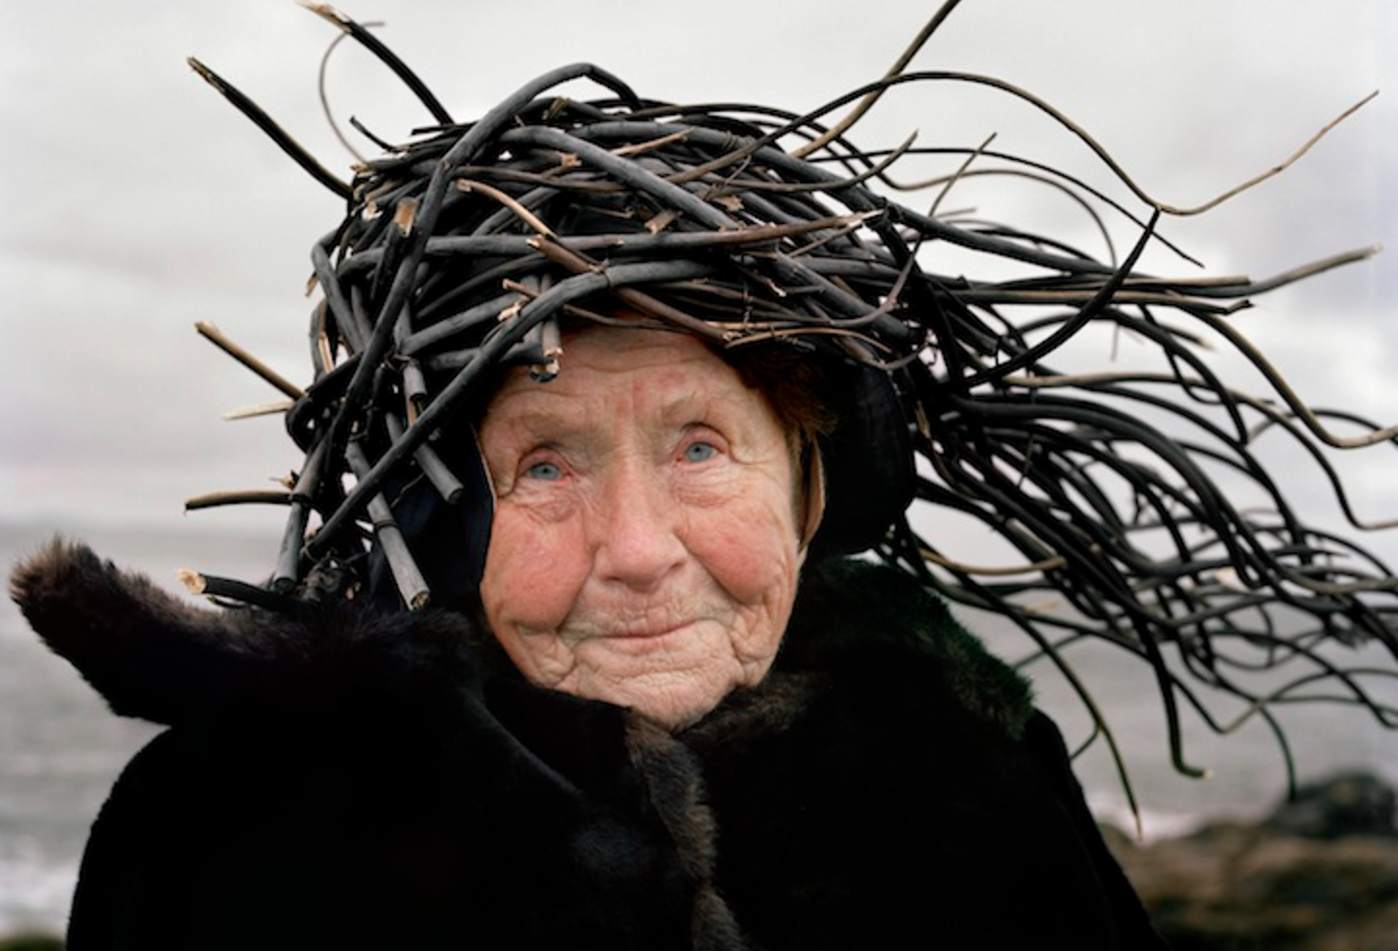 The series is produced in collaboration with retired farmers, fishermen, zoologists, plumbers, opera singers, housewives, artists, academics and ninety year old parachutists. Since 2011 the artist duo has portrayed seniors in Norway, Finland, France, US, UK, Iceland, the Faroe Islands, Sweden, South Korea, Czech Republic, Japan, Senegal, Outer Hebrides, Tasmania and Greenland.